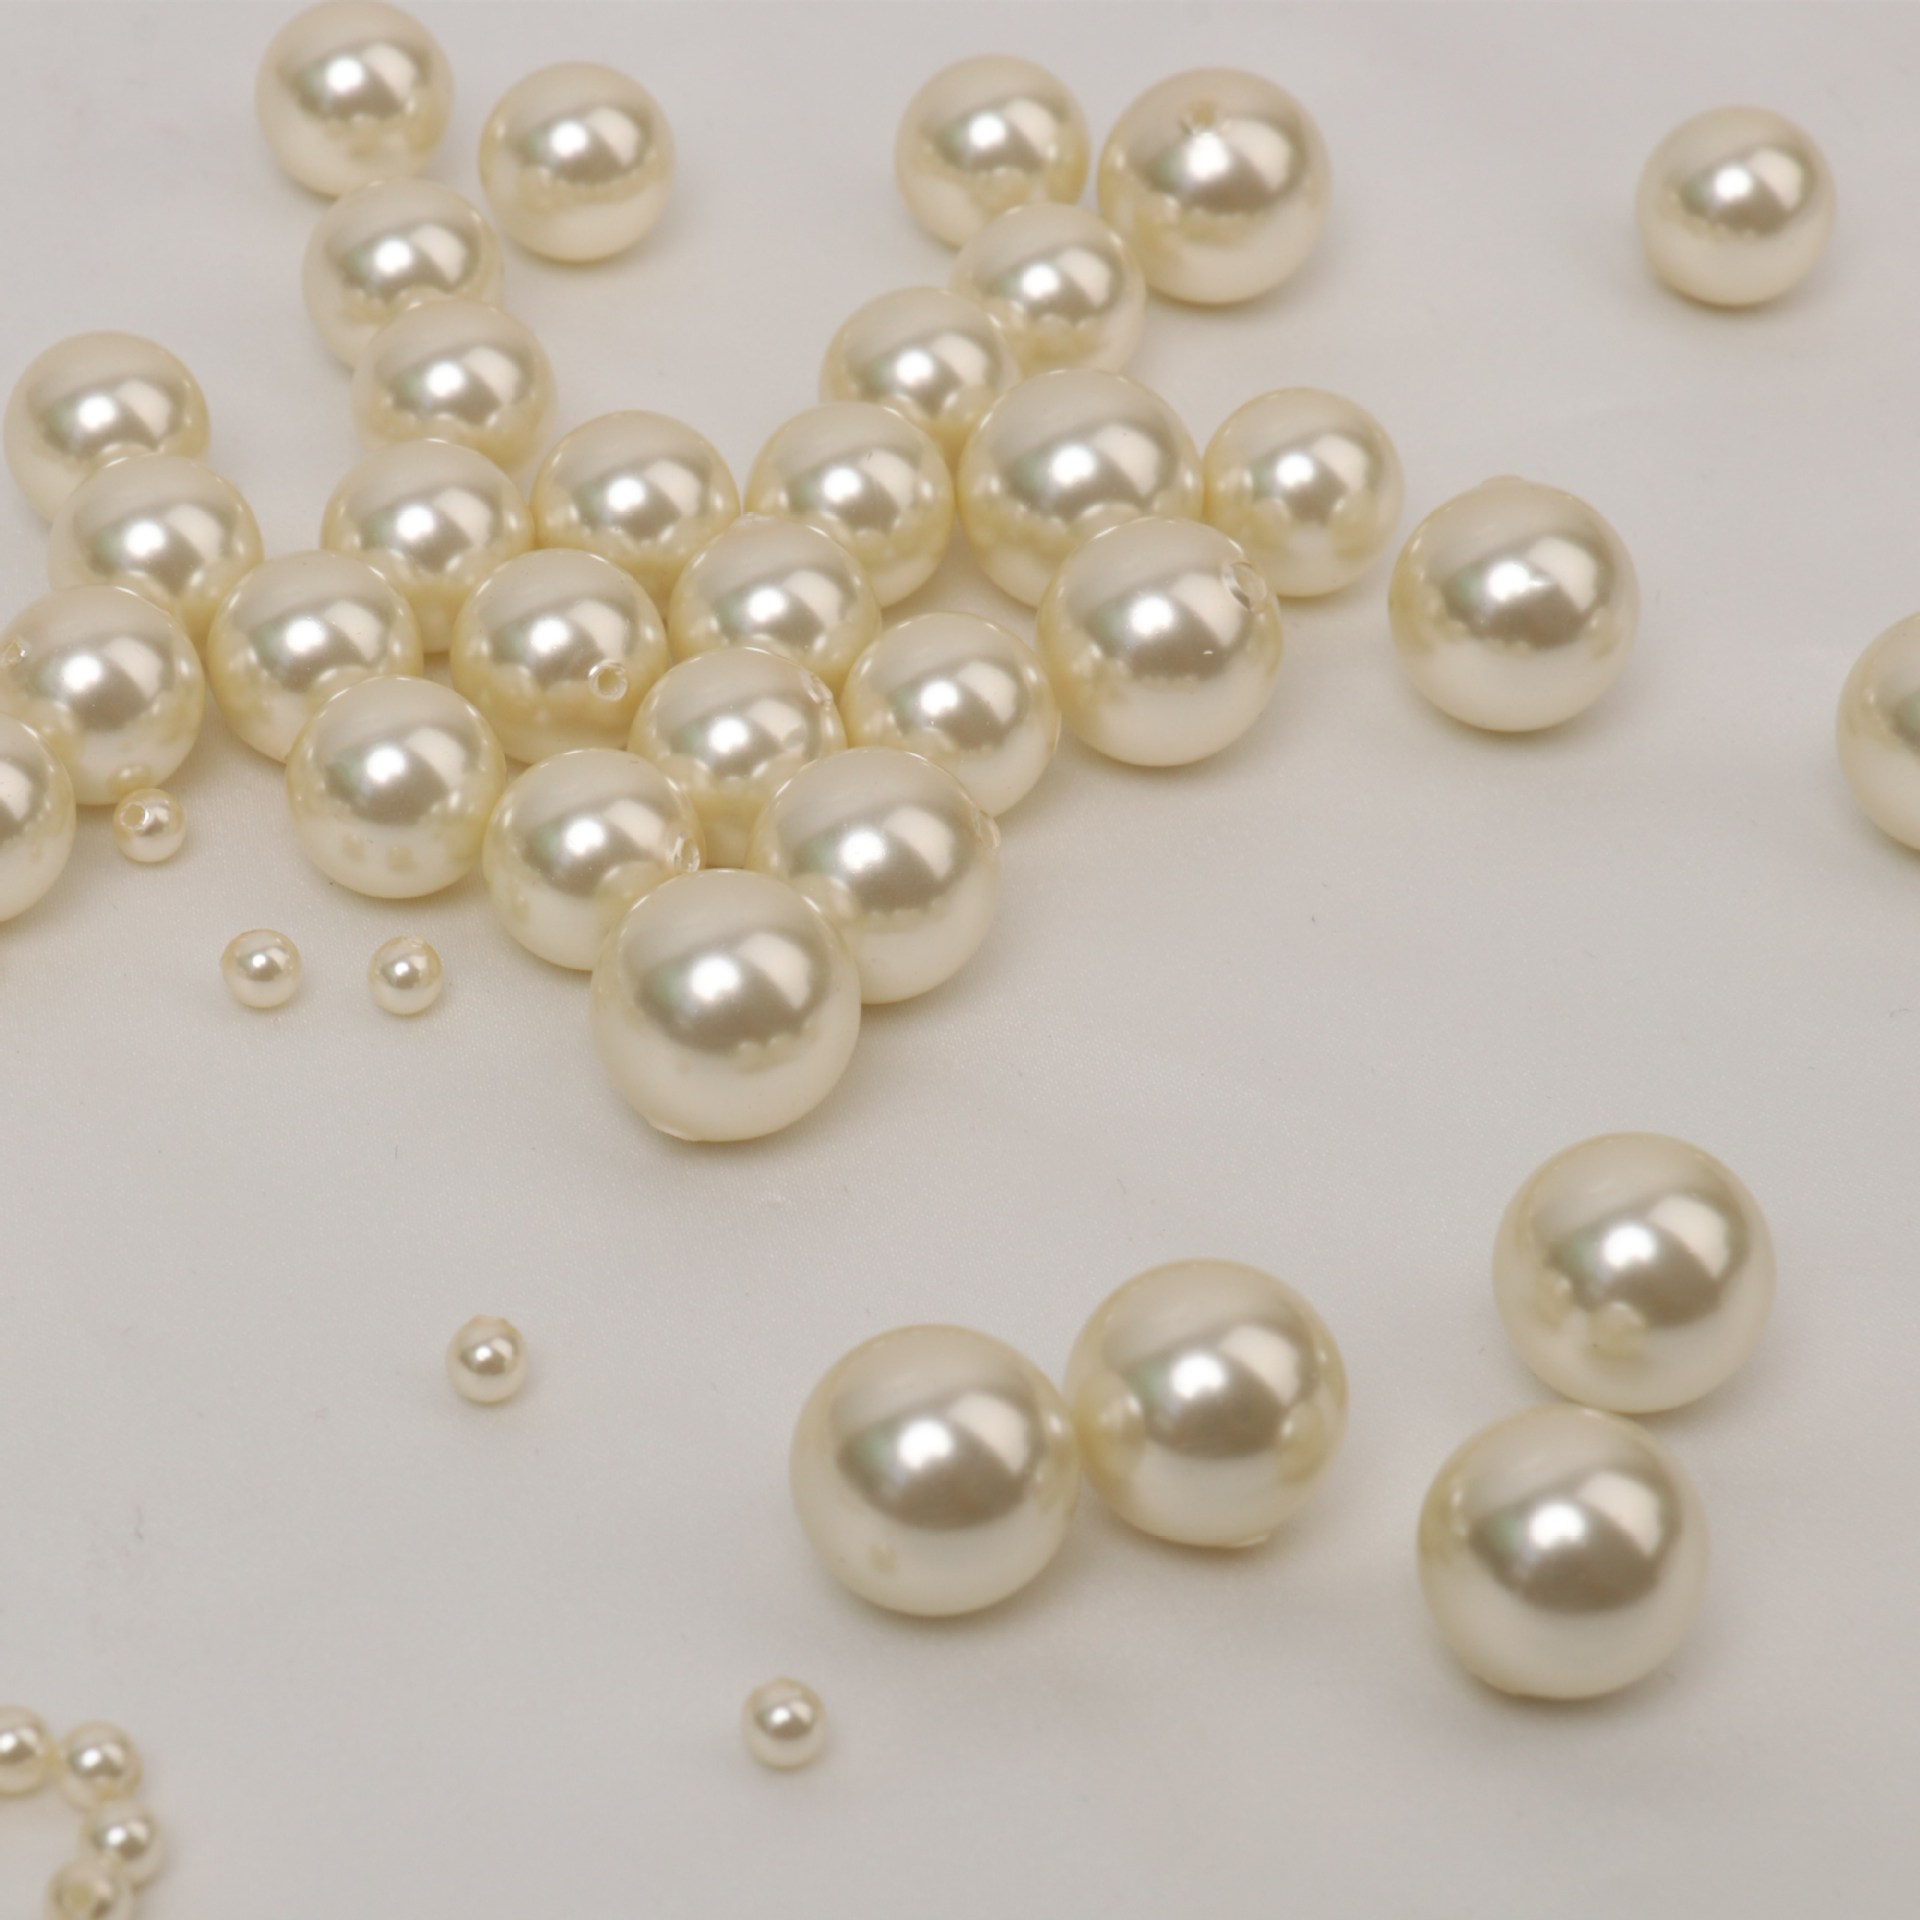 Pearl off-white 4mm